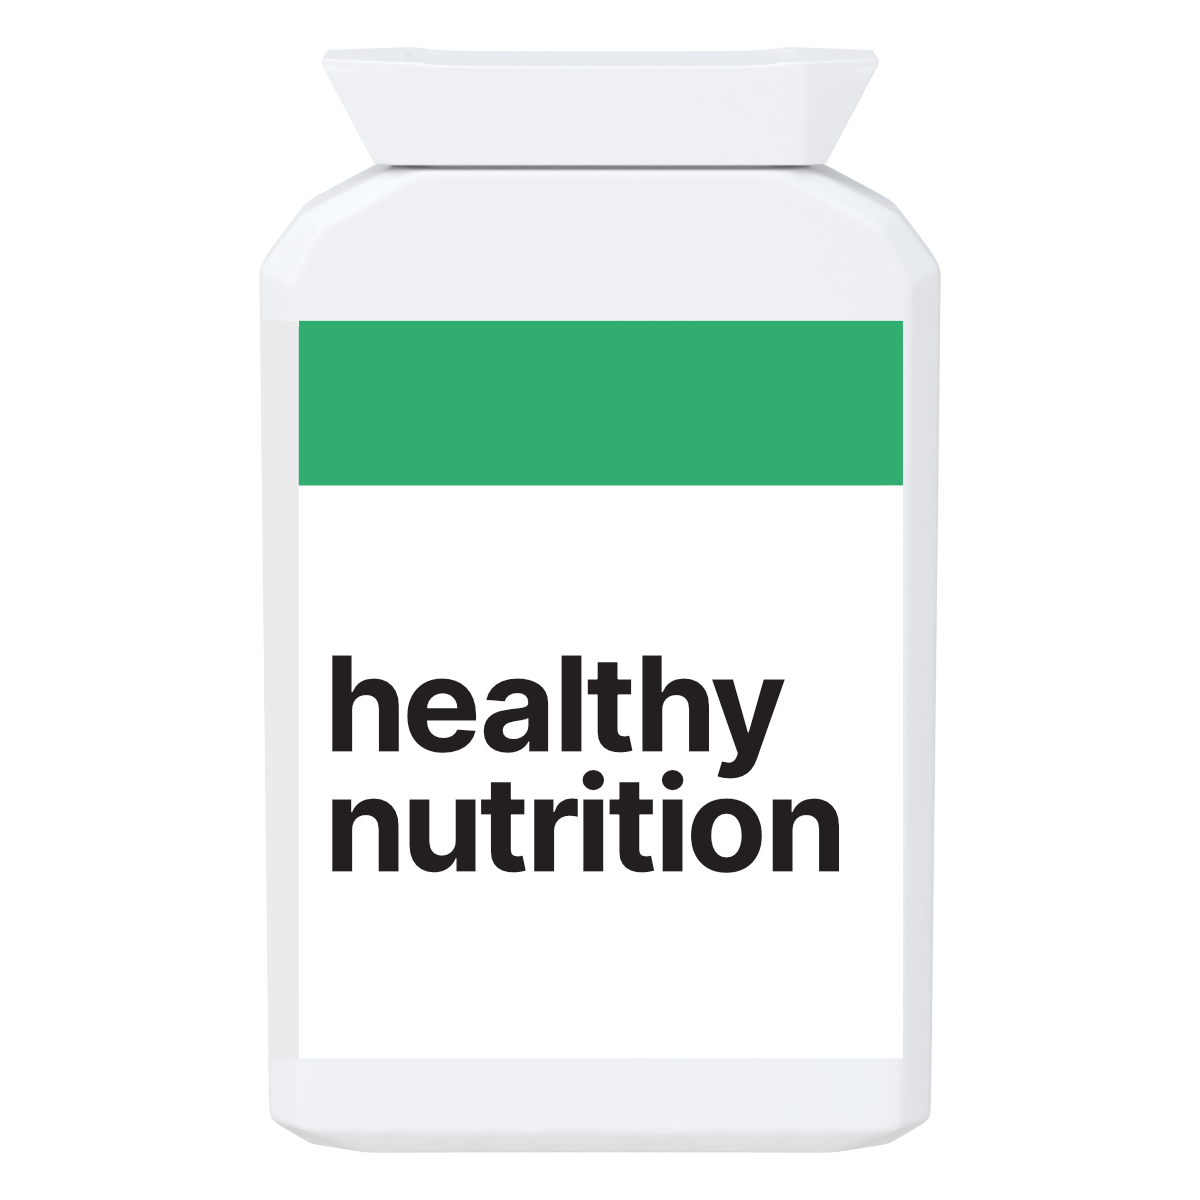 Products to help with Nutrition